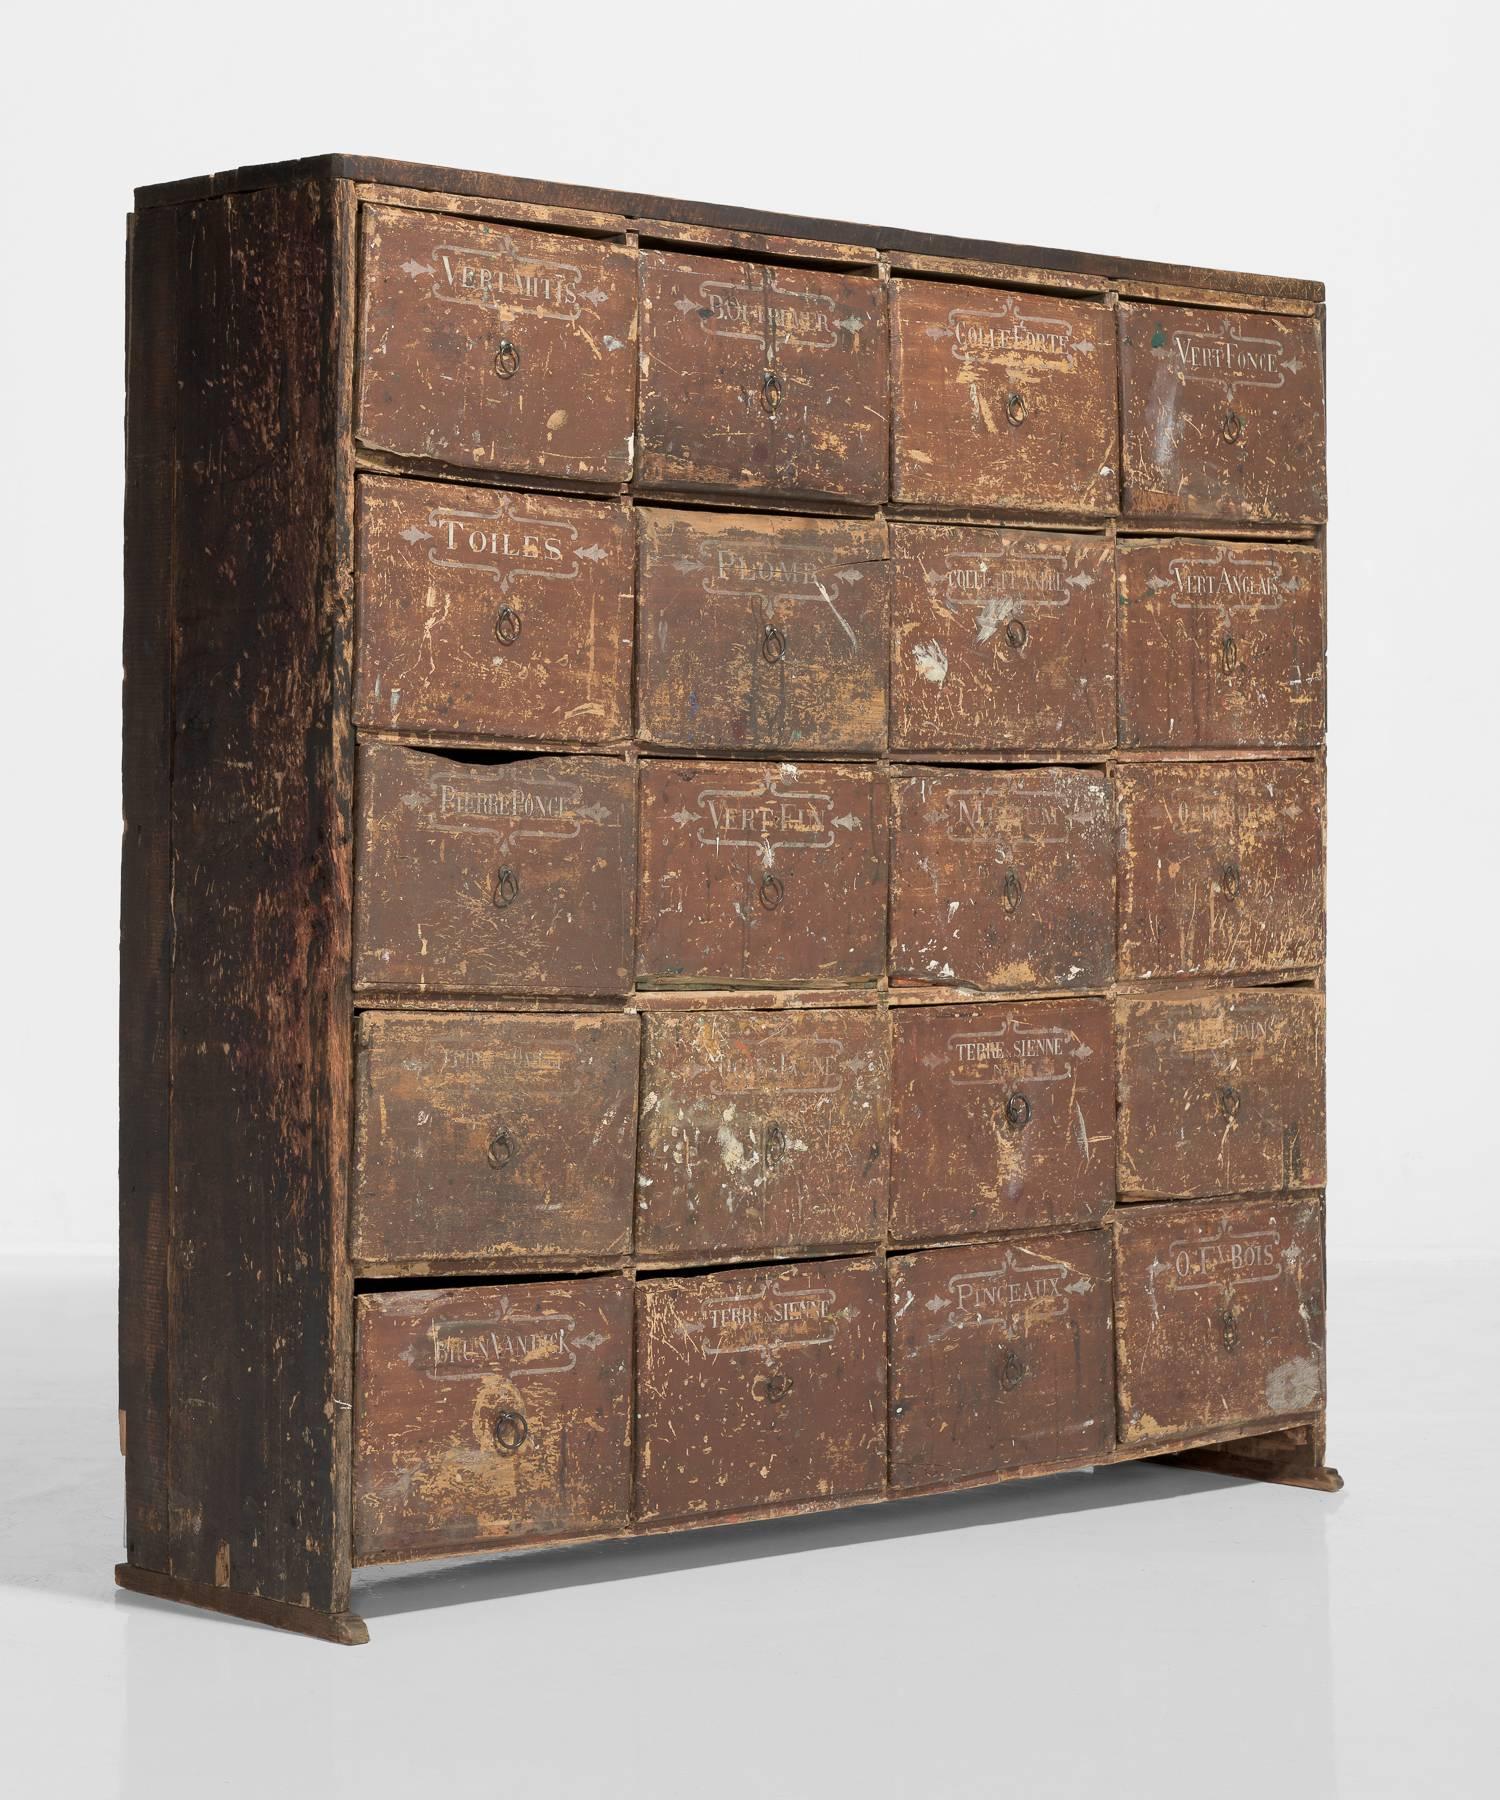 French Artist Pigment Drawers, France, circa 1820